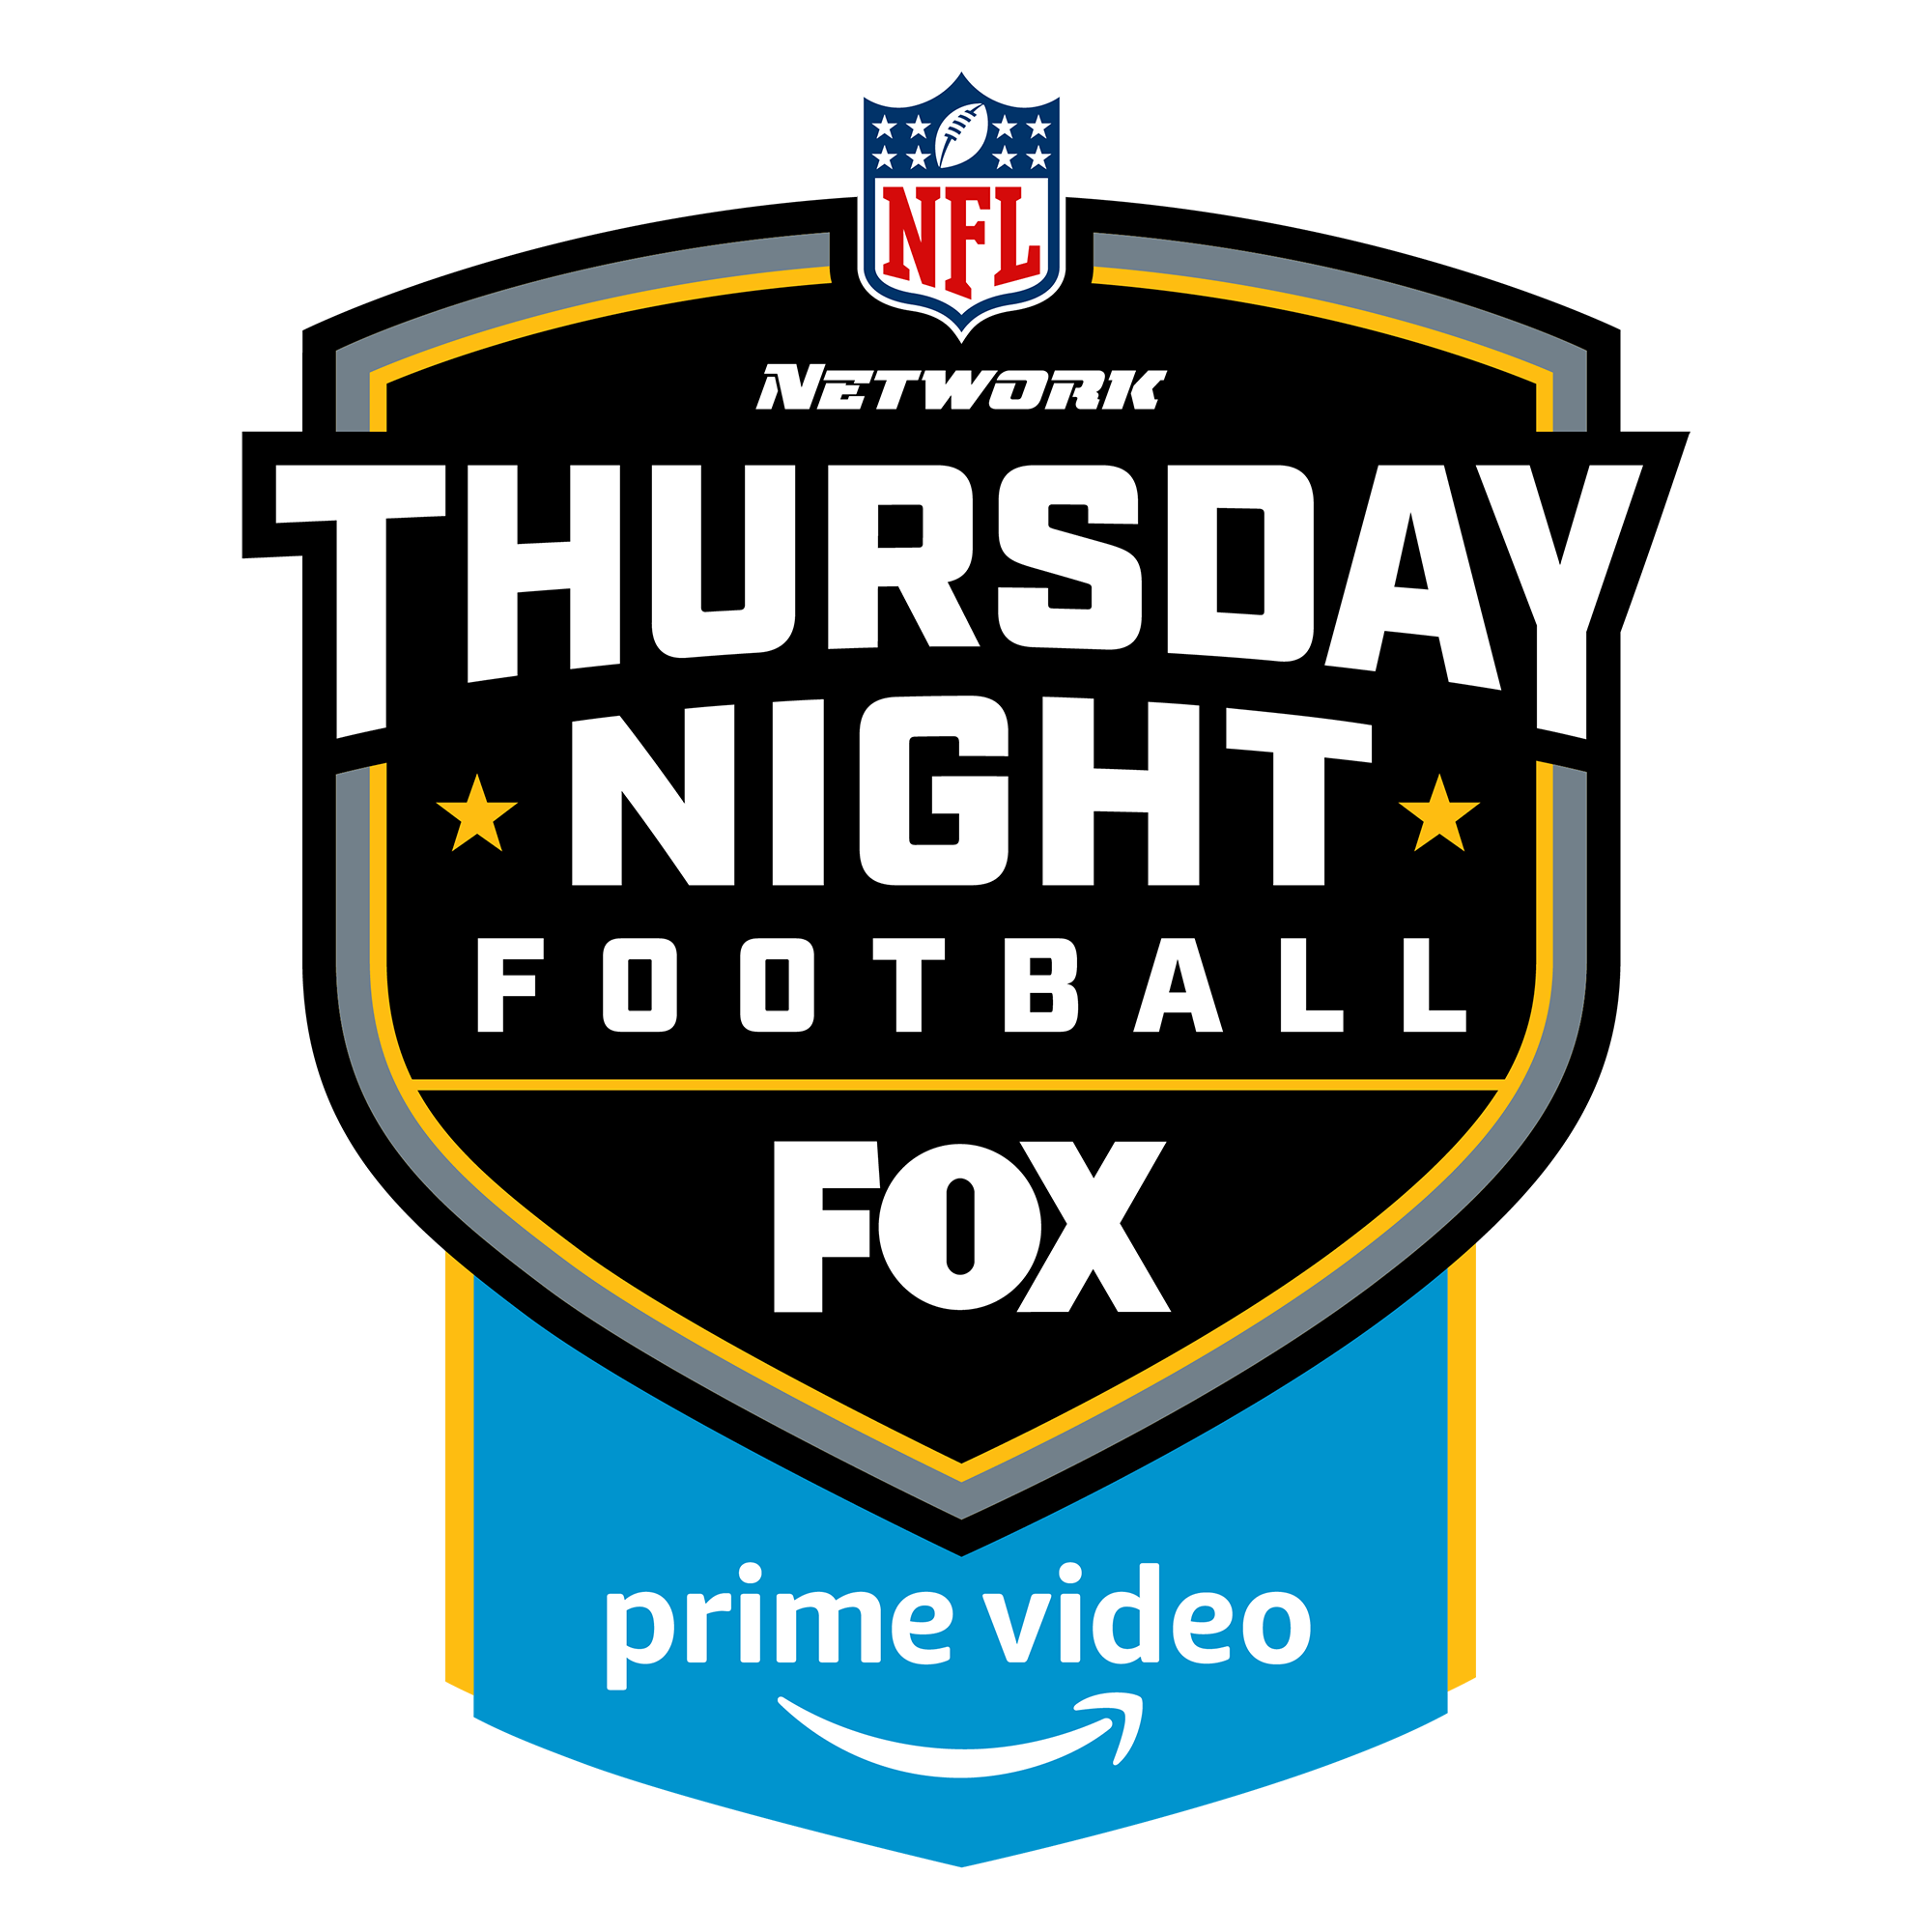 what network is playing the nfl game tonight